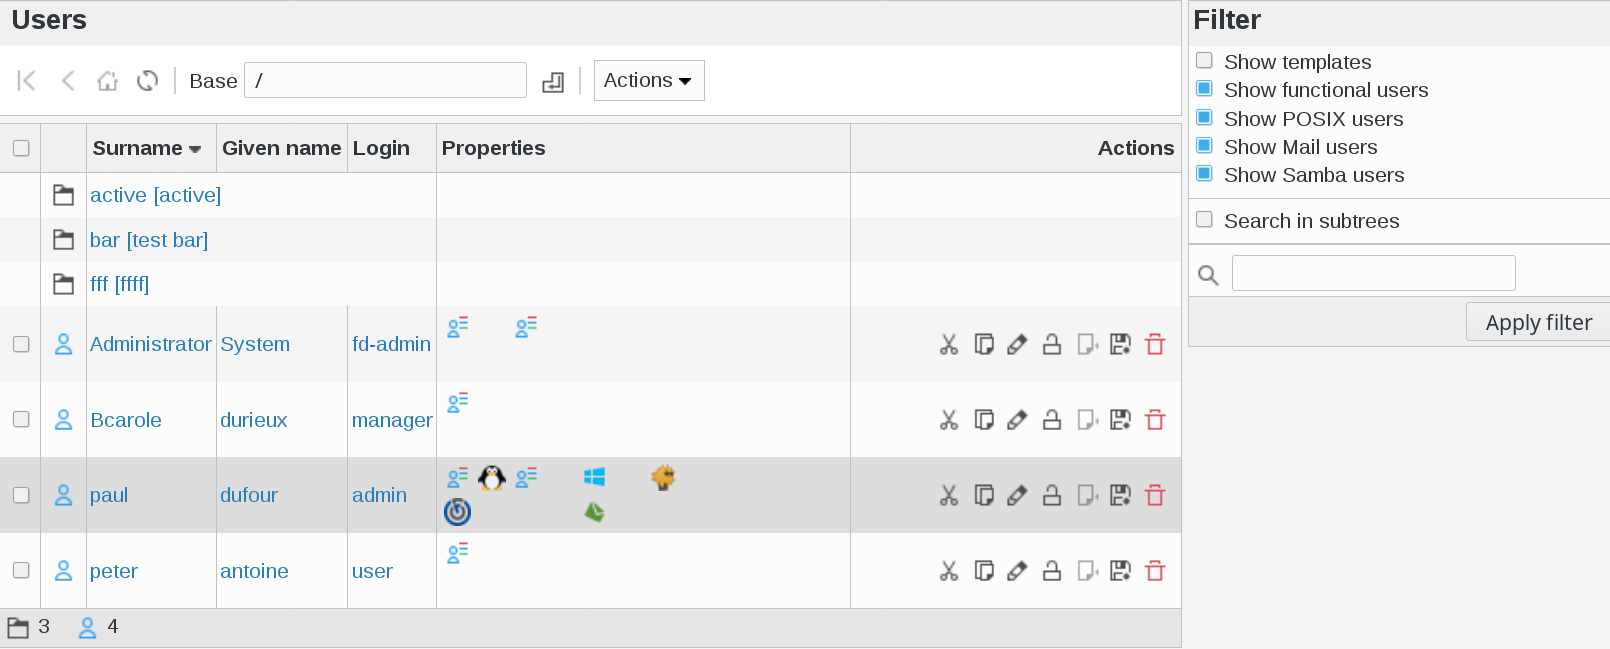 Picture of users overview in FusionDirectory